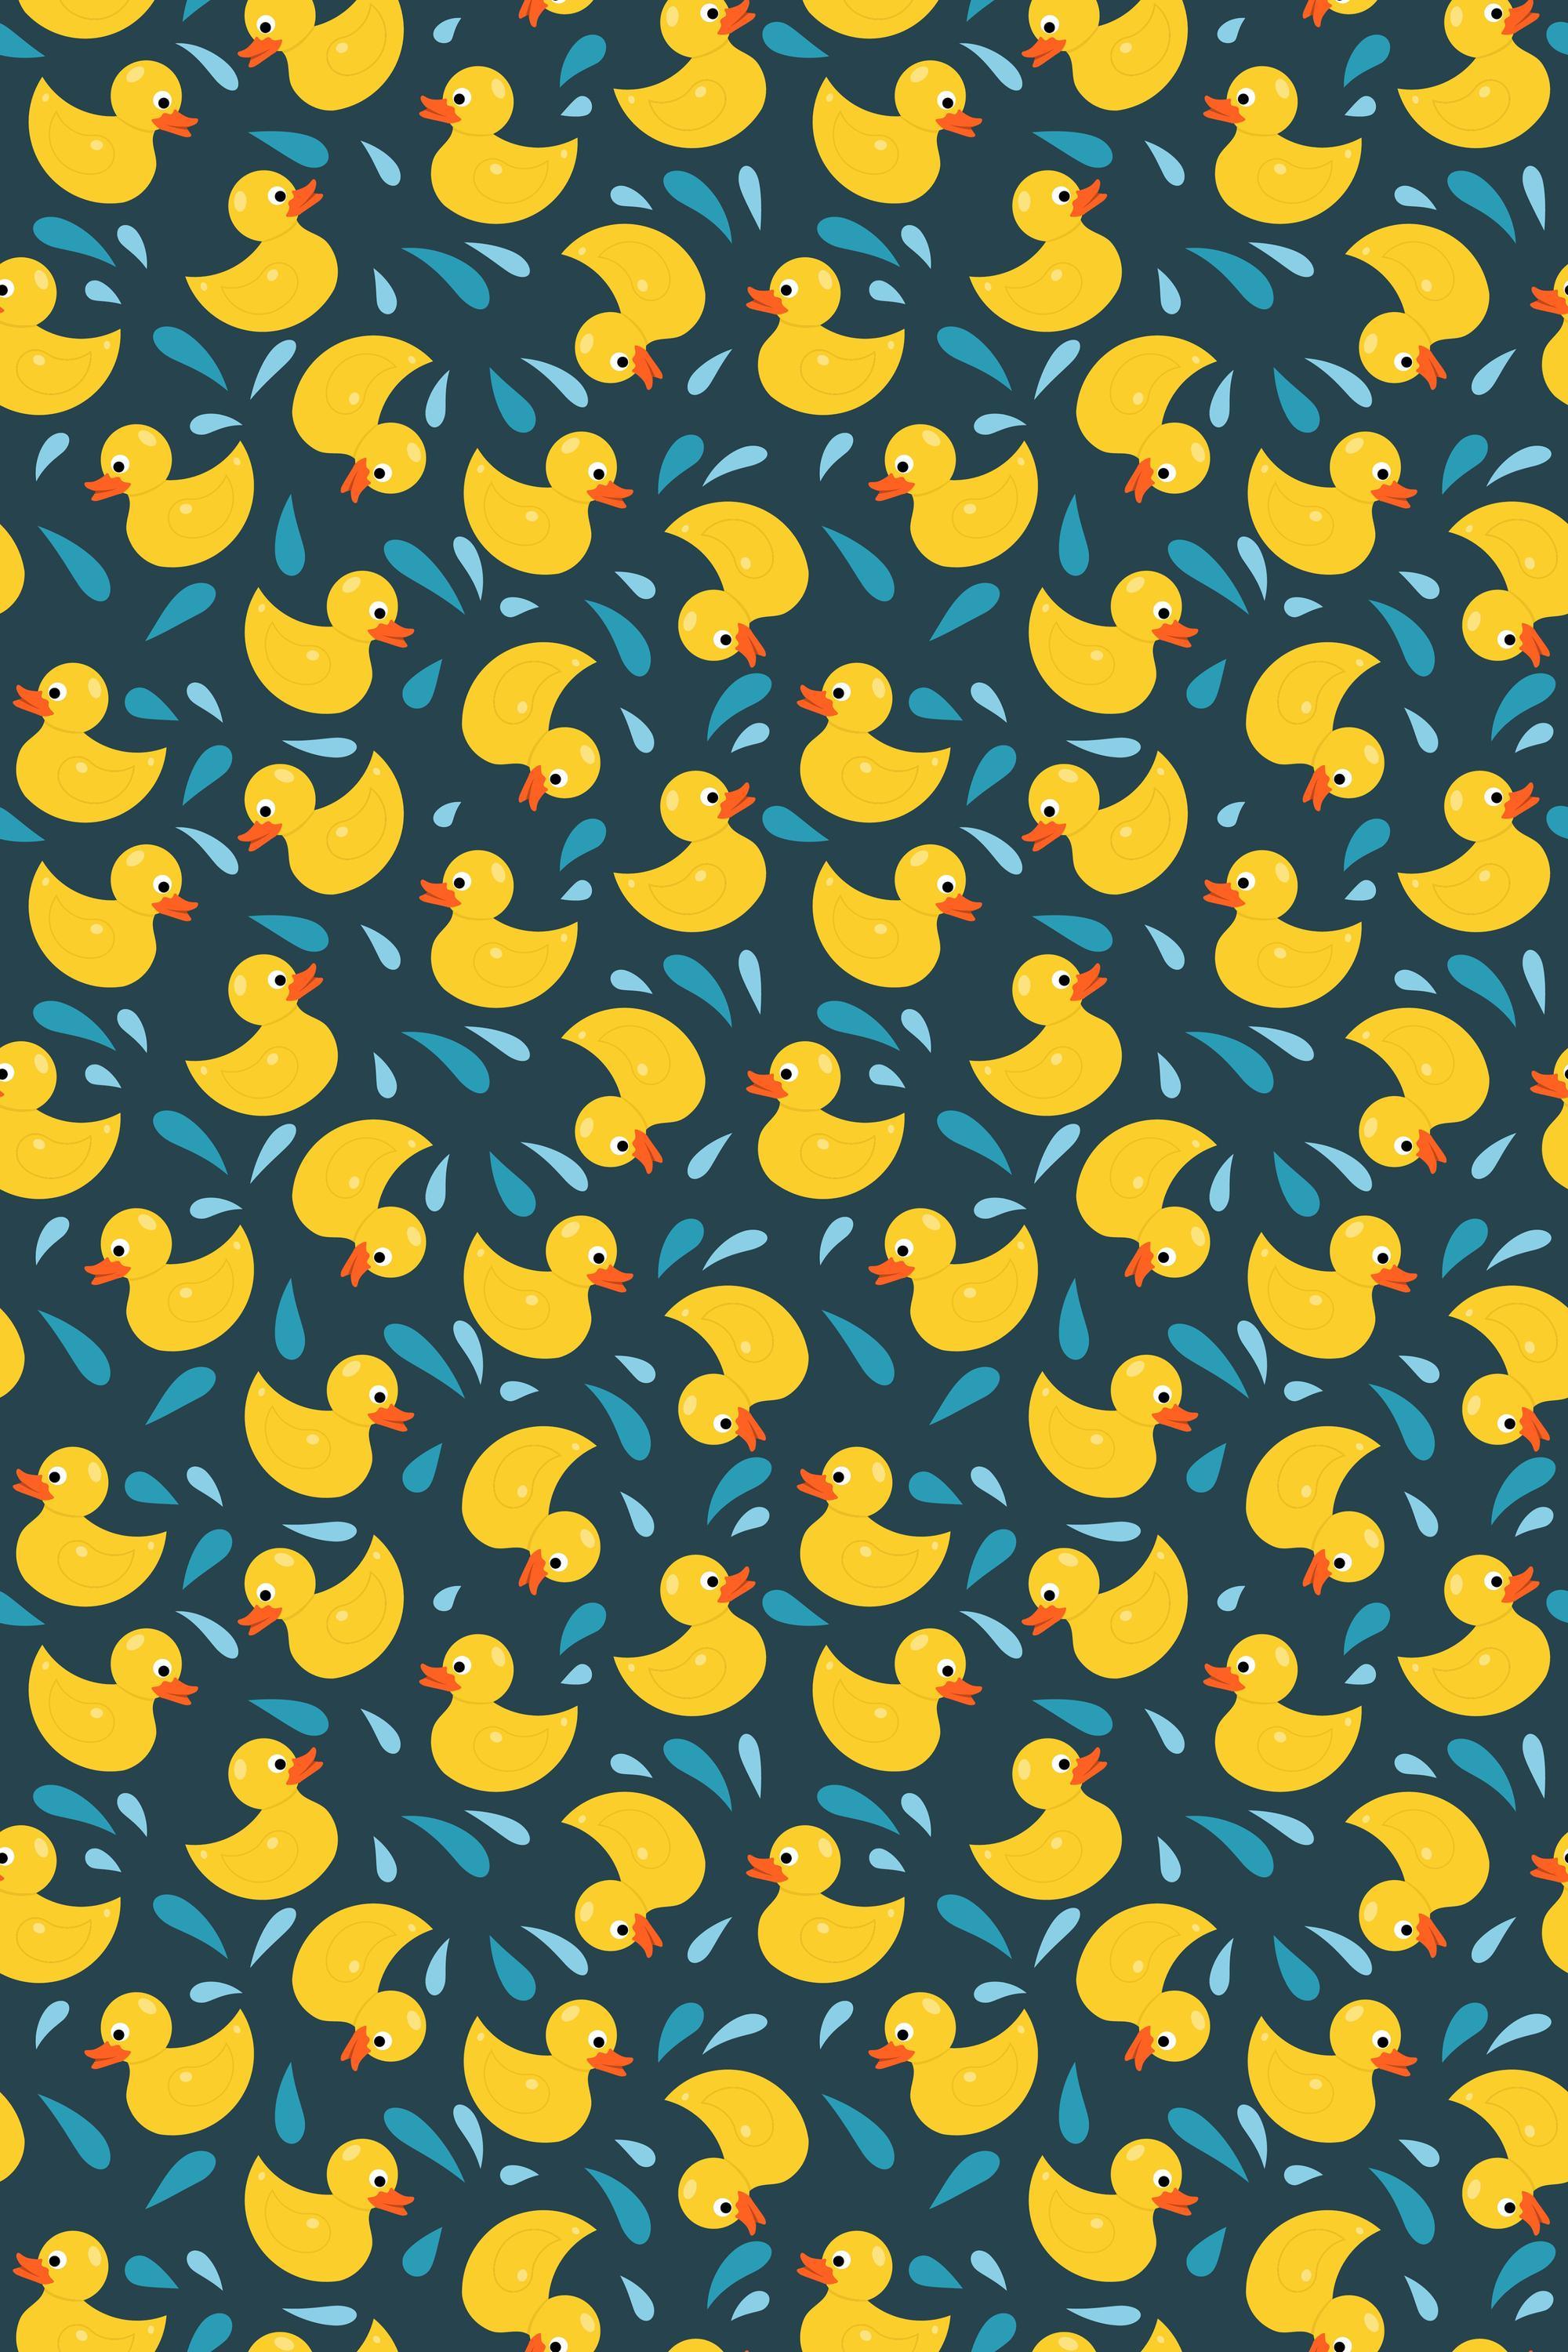 Wrapping Paper -Rubber Ducky - Elementologie